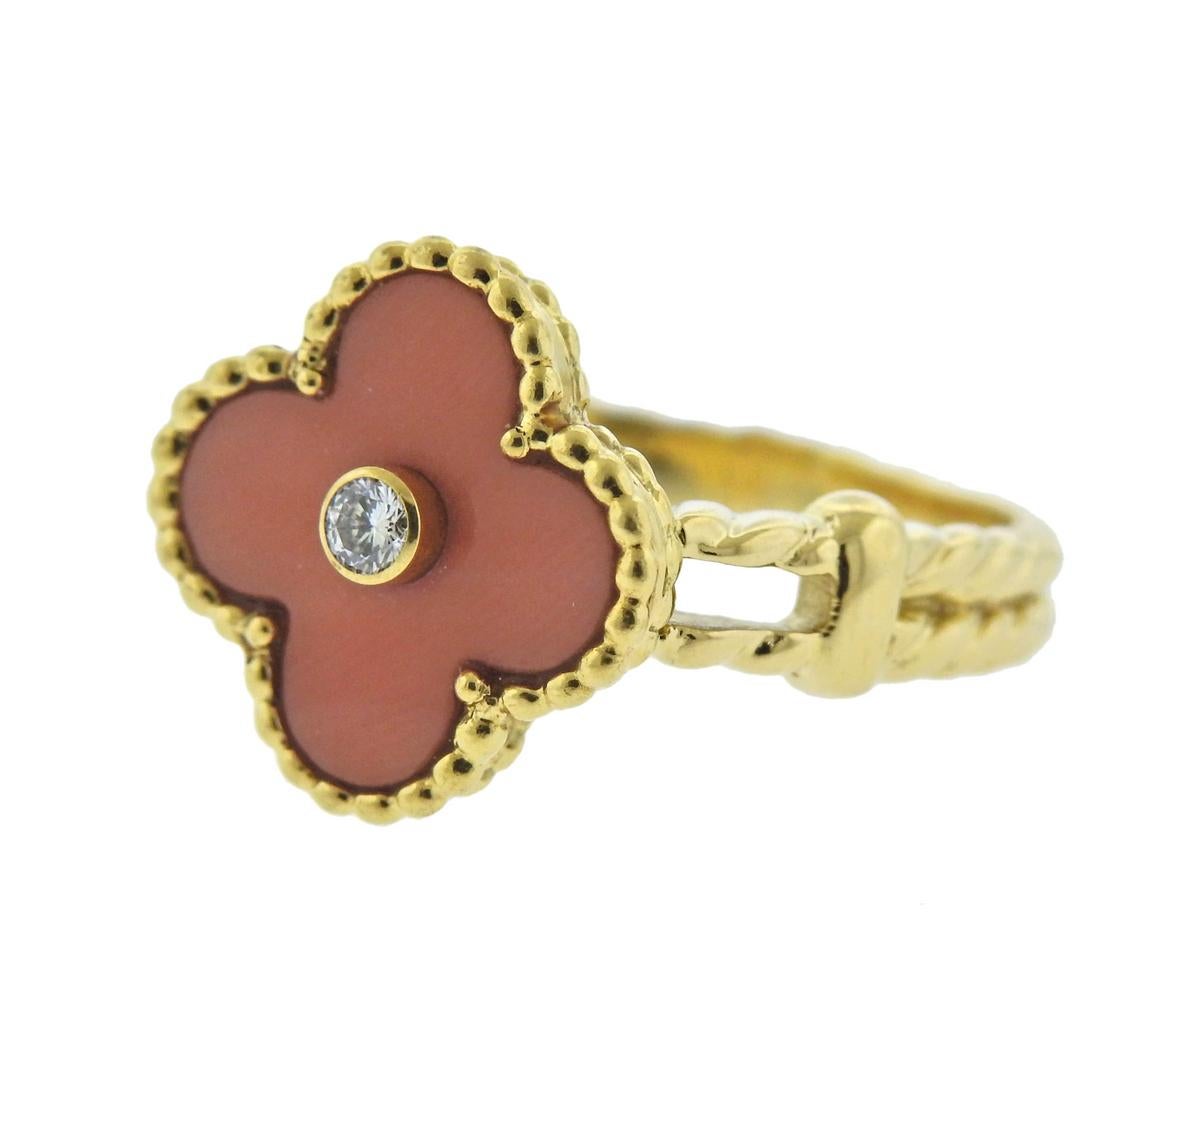 18k yellow gold clover ring, crafted by Van Cleef & Arpels for iconic Vintage Alhambra collection, set with angel skin coral top and 0.06ct VVS/FG diamond. Ring size - 7, ring top - 14.5mm x 14.5mm, weighs 6.4 grams. Marked: VCA, 750, B5938K***.